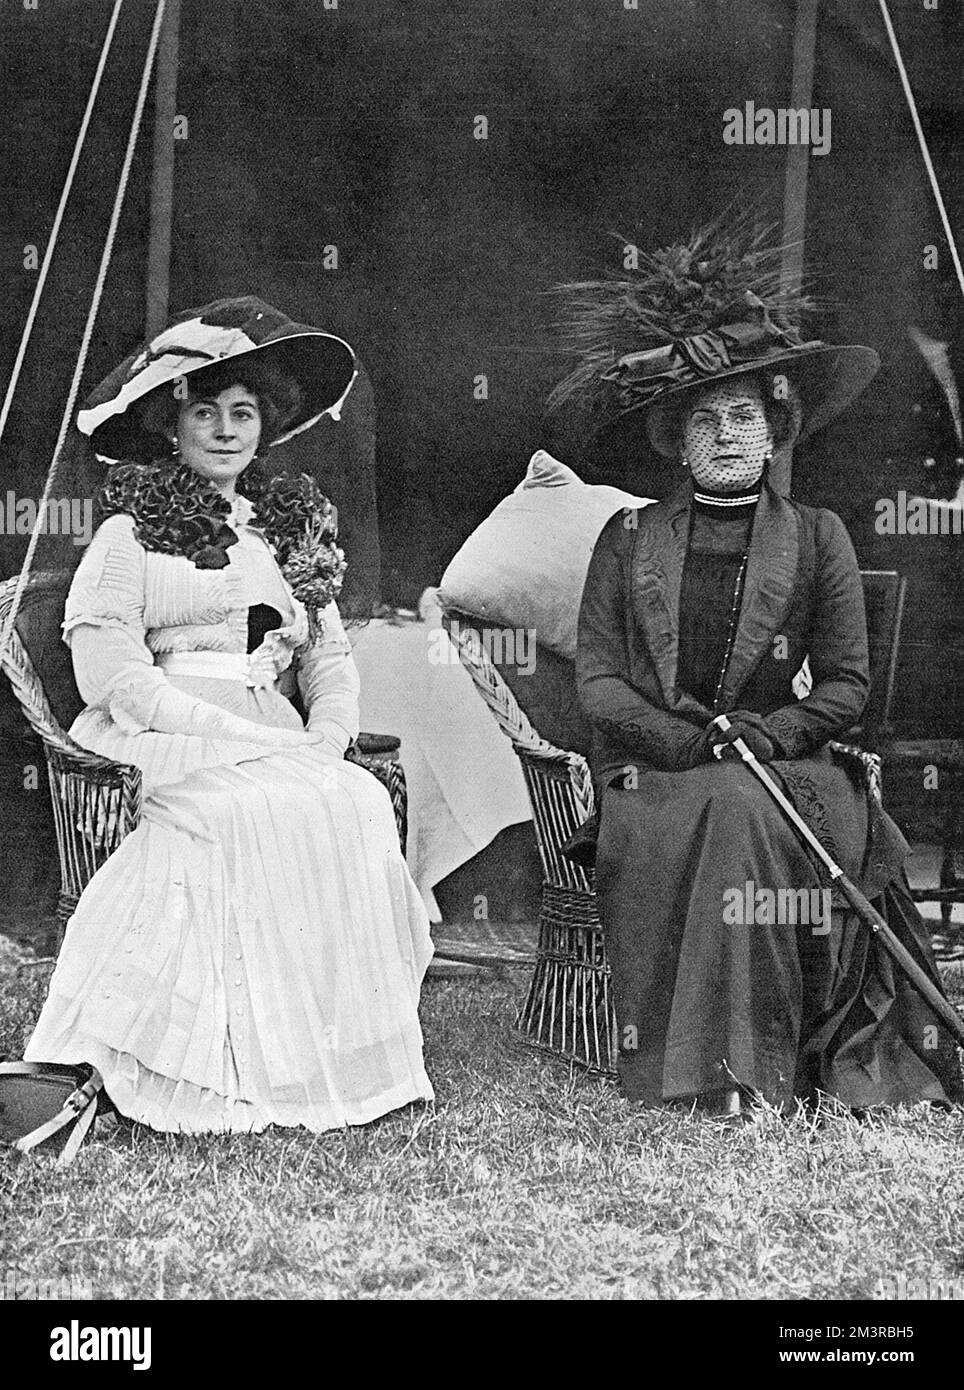 Queen Ena of Spain (1887-1969), formerly Princess Victoria Eugenie of Battenberg, granddaughter of Queen Victoria, pictured at Eaton Hall in Cheshire with her hostess, Shelagh, Duchess of Westminster during a polo match played on the duke's private ground in the park adjacent to the house.  The Tatler comments that, 'The Duke and Duchess of Westminster always entertain on a princely scale and are admirable hosts.'     Date: 1910 Stock Photo